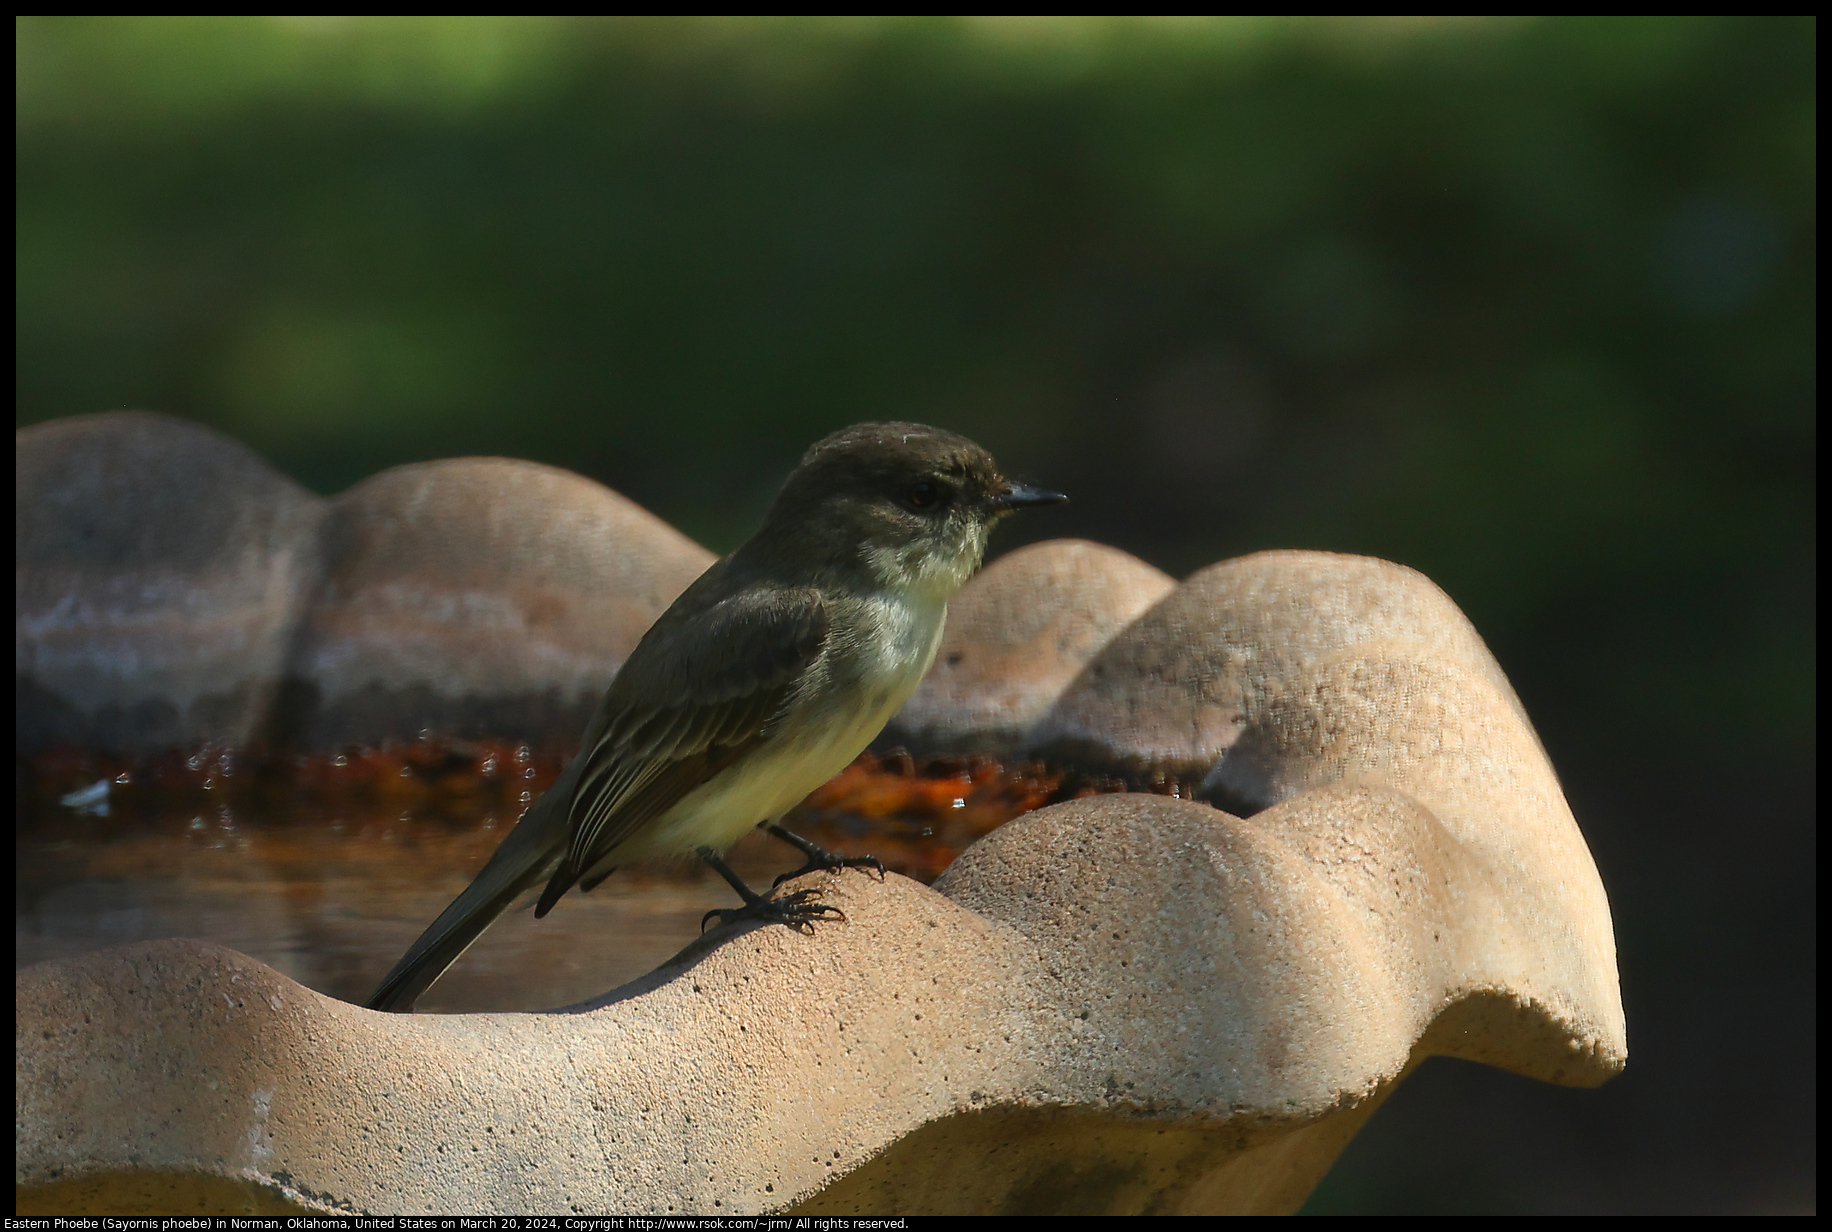 Eastern Phoebe (Sayornis phoebe) in Norman, Oklahoma, United States on March 20, 2024